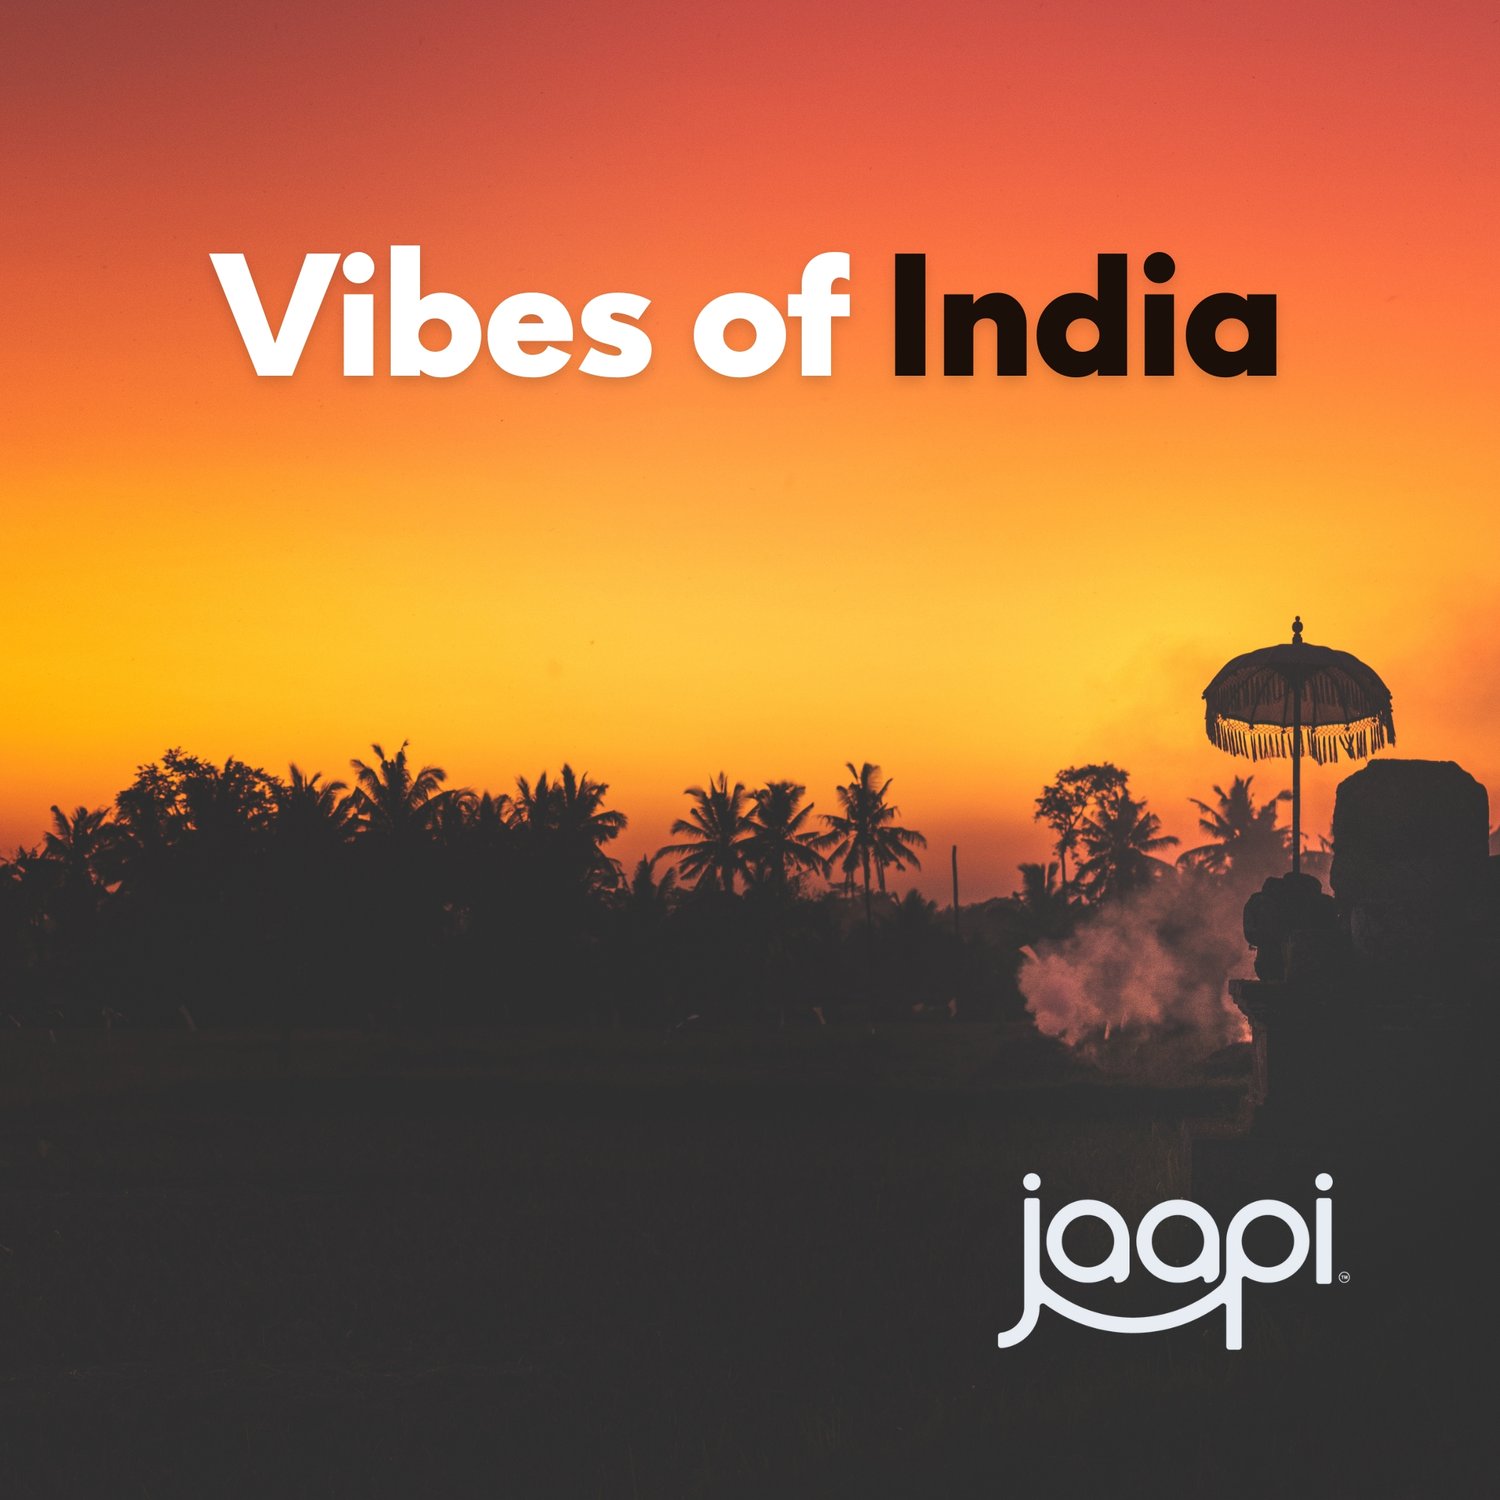 Vibes of India: Music influenced by the sacred vibe of India. Curated by Jaapi Media.